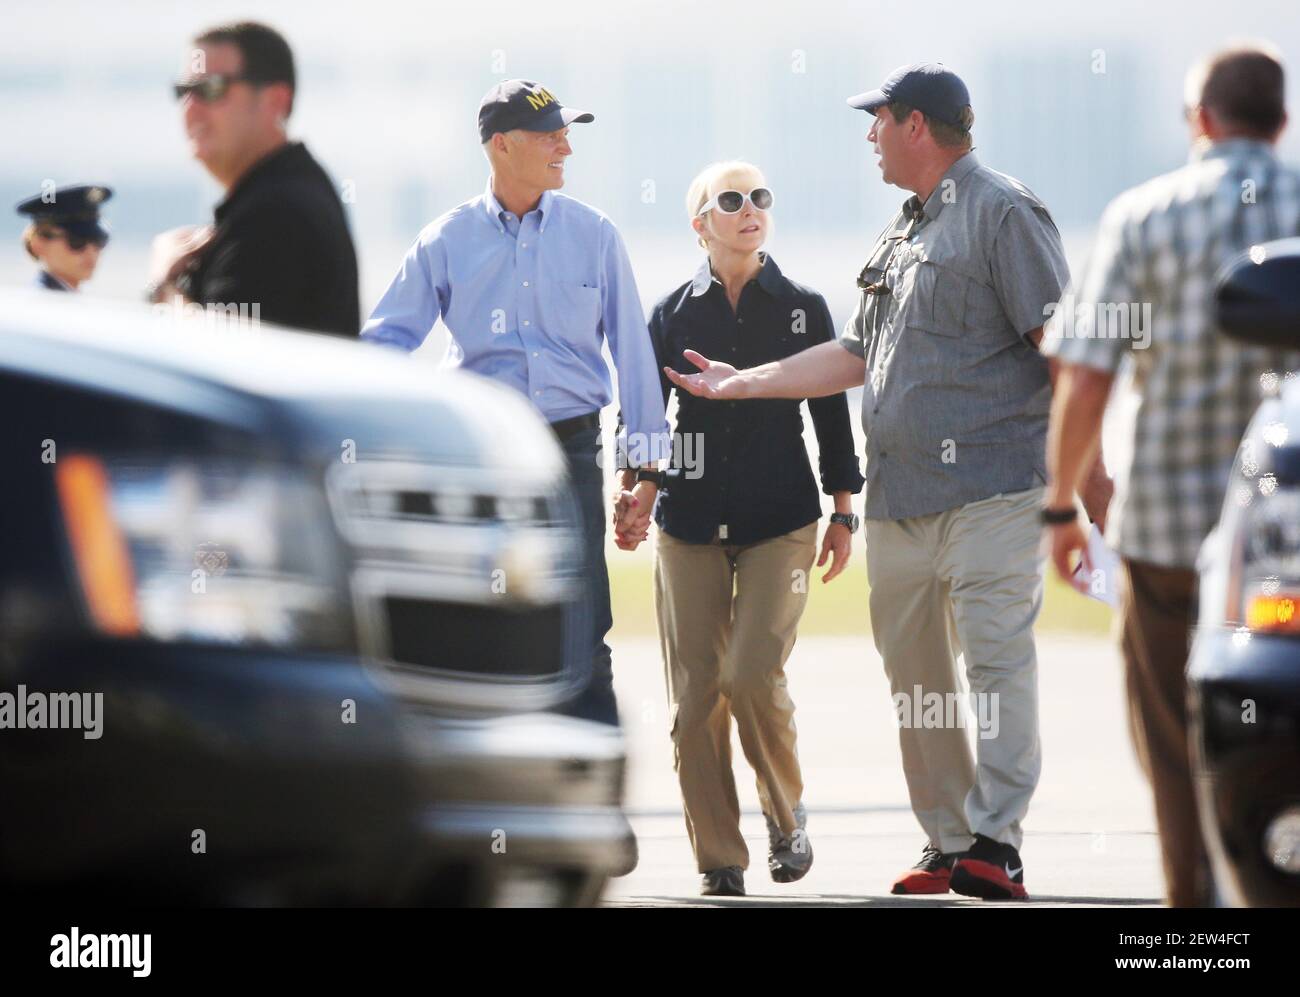 Sep 14, 2017; Fort Myers, FL, USA; Florida governor Rick Scott and his wife Ann arrive Thursday at Southwest International Airport in Fort Myers to greet President Donald Trump. The President will be visiting areas that were ravaged by Hurricane Irma. Mandatory Credit: Kinfay Moroti/News-Press via USA TODAY NETWORK Stock Photo